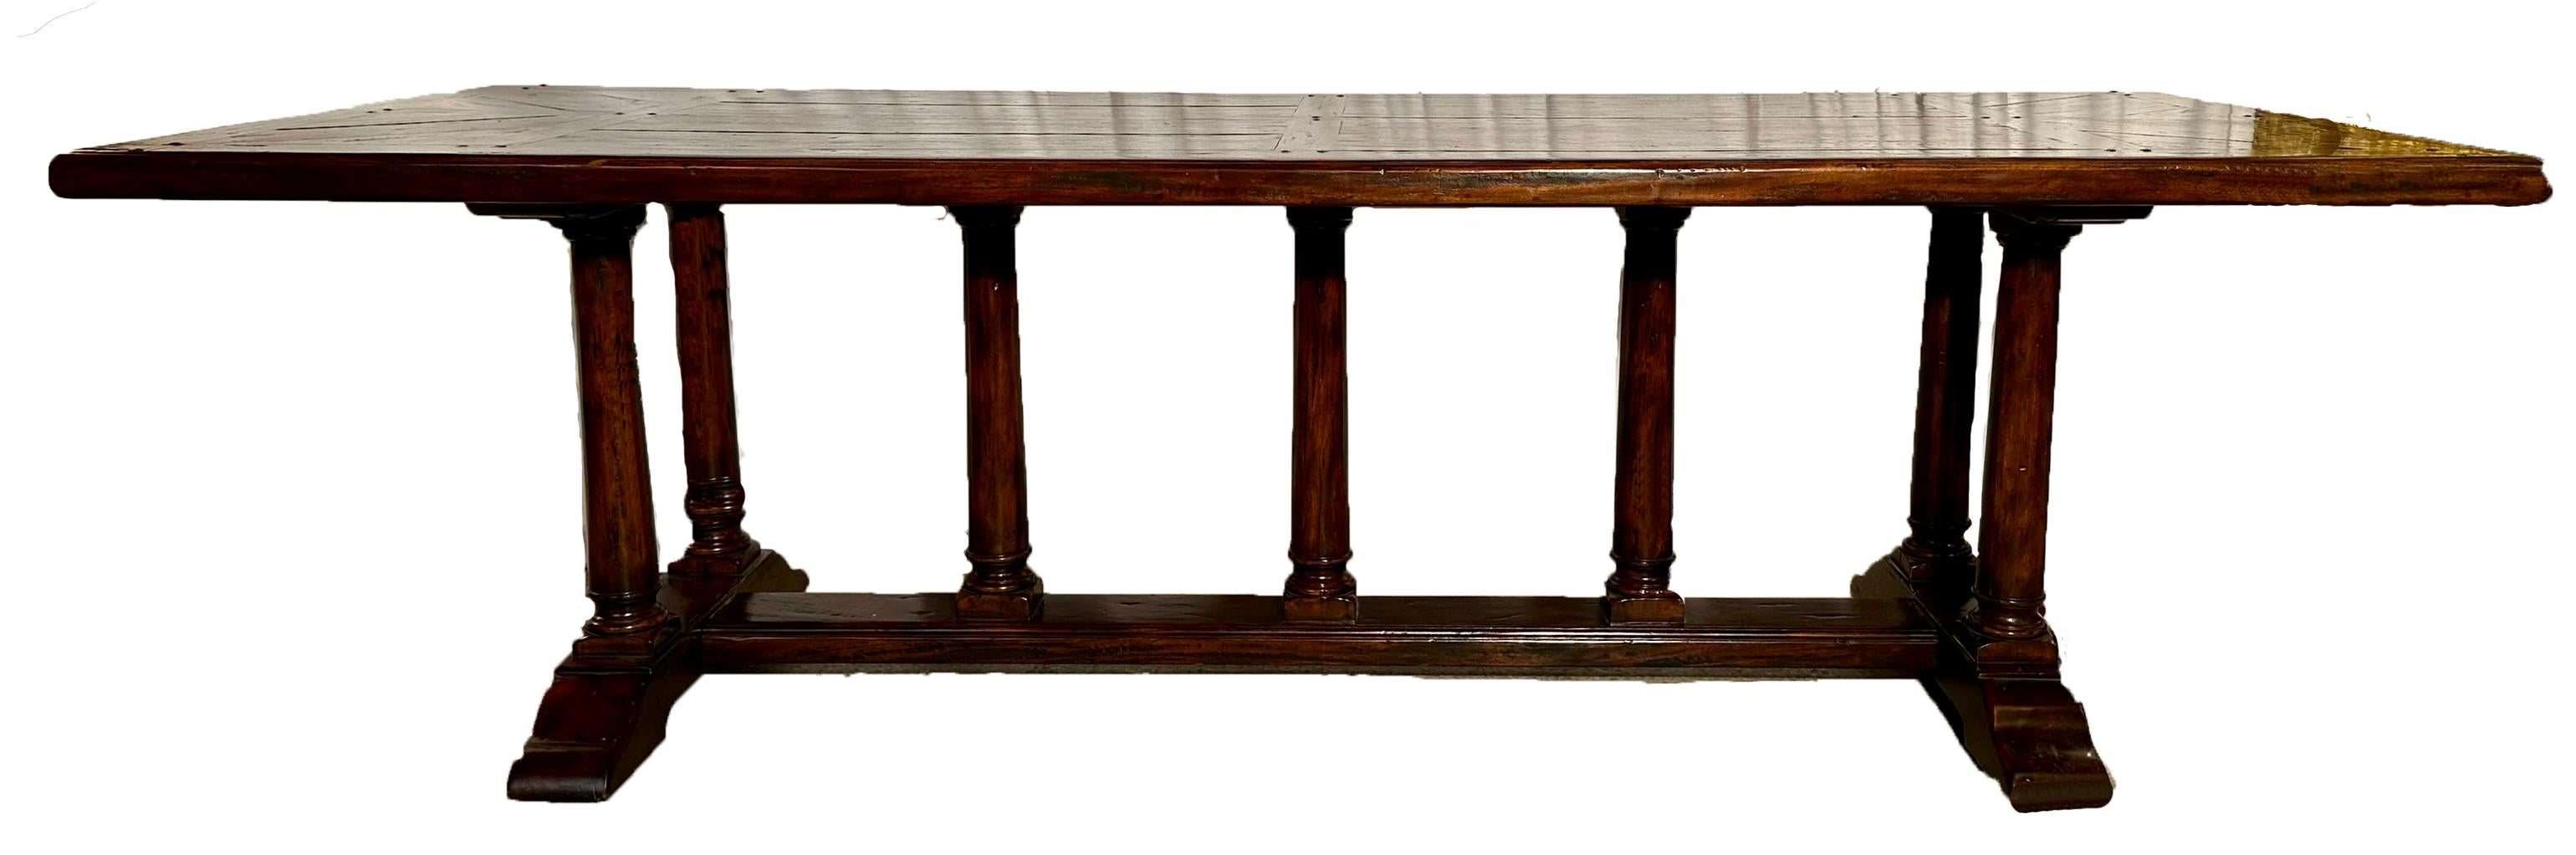 Antique English Yew Wood Trestle Table, Circa 1900. In Good Condition For Sale In New Orleans, LA